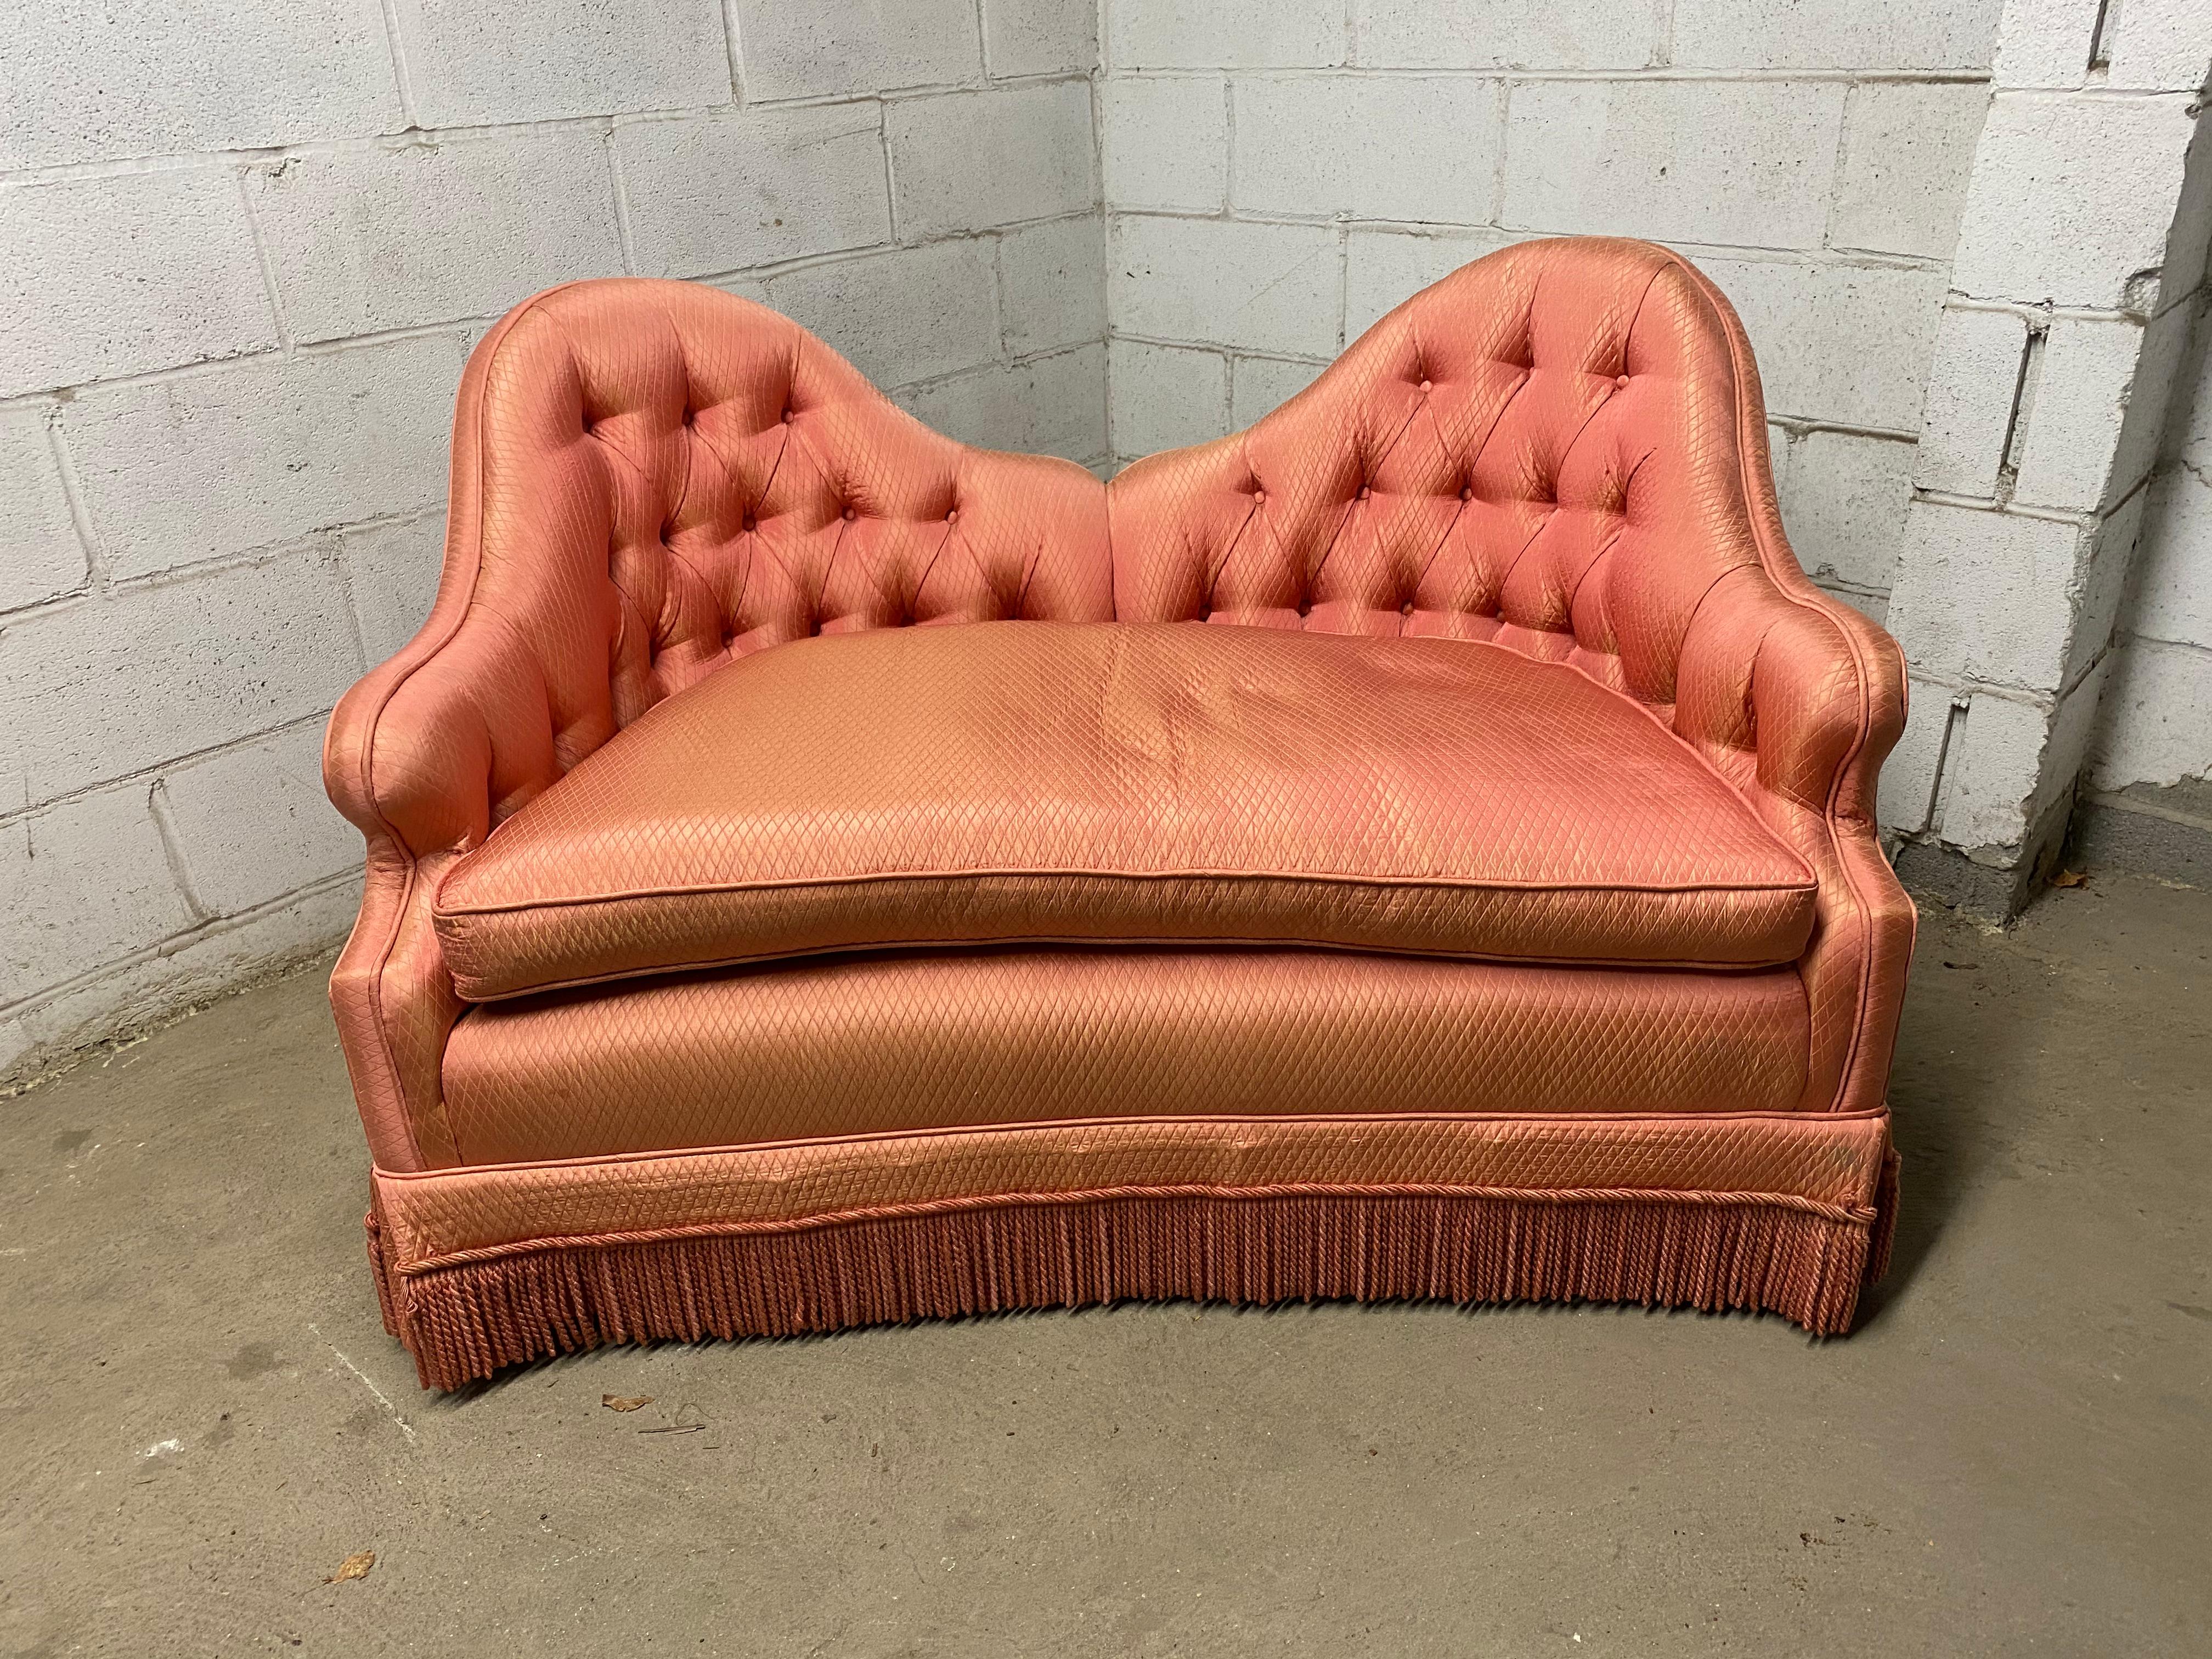 Hollywood Regency style tufted camel back loveseat. Visually dramatic and lovely. Amazing lines and details. Circa 1970. Upholstered in a silk salmon fabric. Fringe skirt. 

Structurally sound and sturdy frame. The fabric has signs of fading due